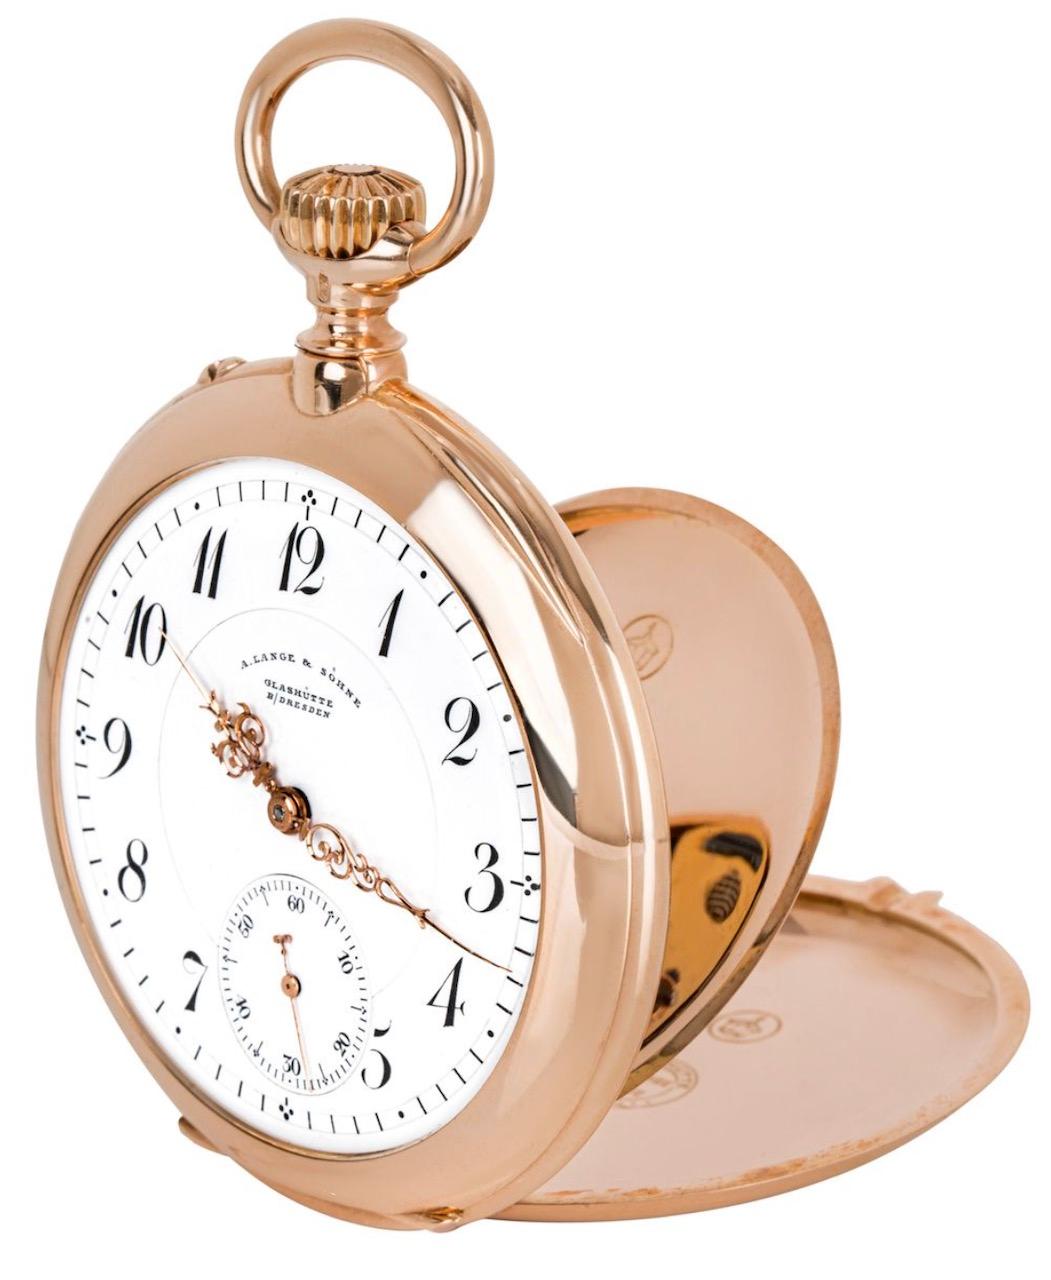 Antique A. Lange & Sohne. A Rare 18ct Rose Gold Open Face Keyless Lever Pocket Watch C1920 with it's Original Box and Paper and Matching Rose Gold Chain.

Dial: The perfect fully signed A. Lange & Sohne Glashutte Dresden white enamel dial with